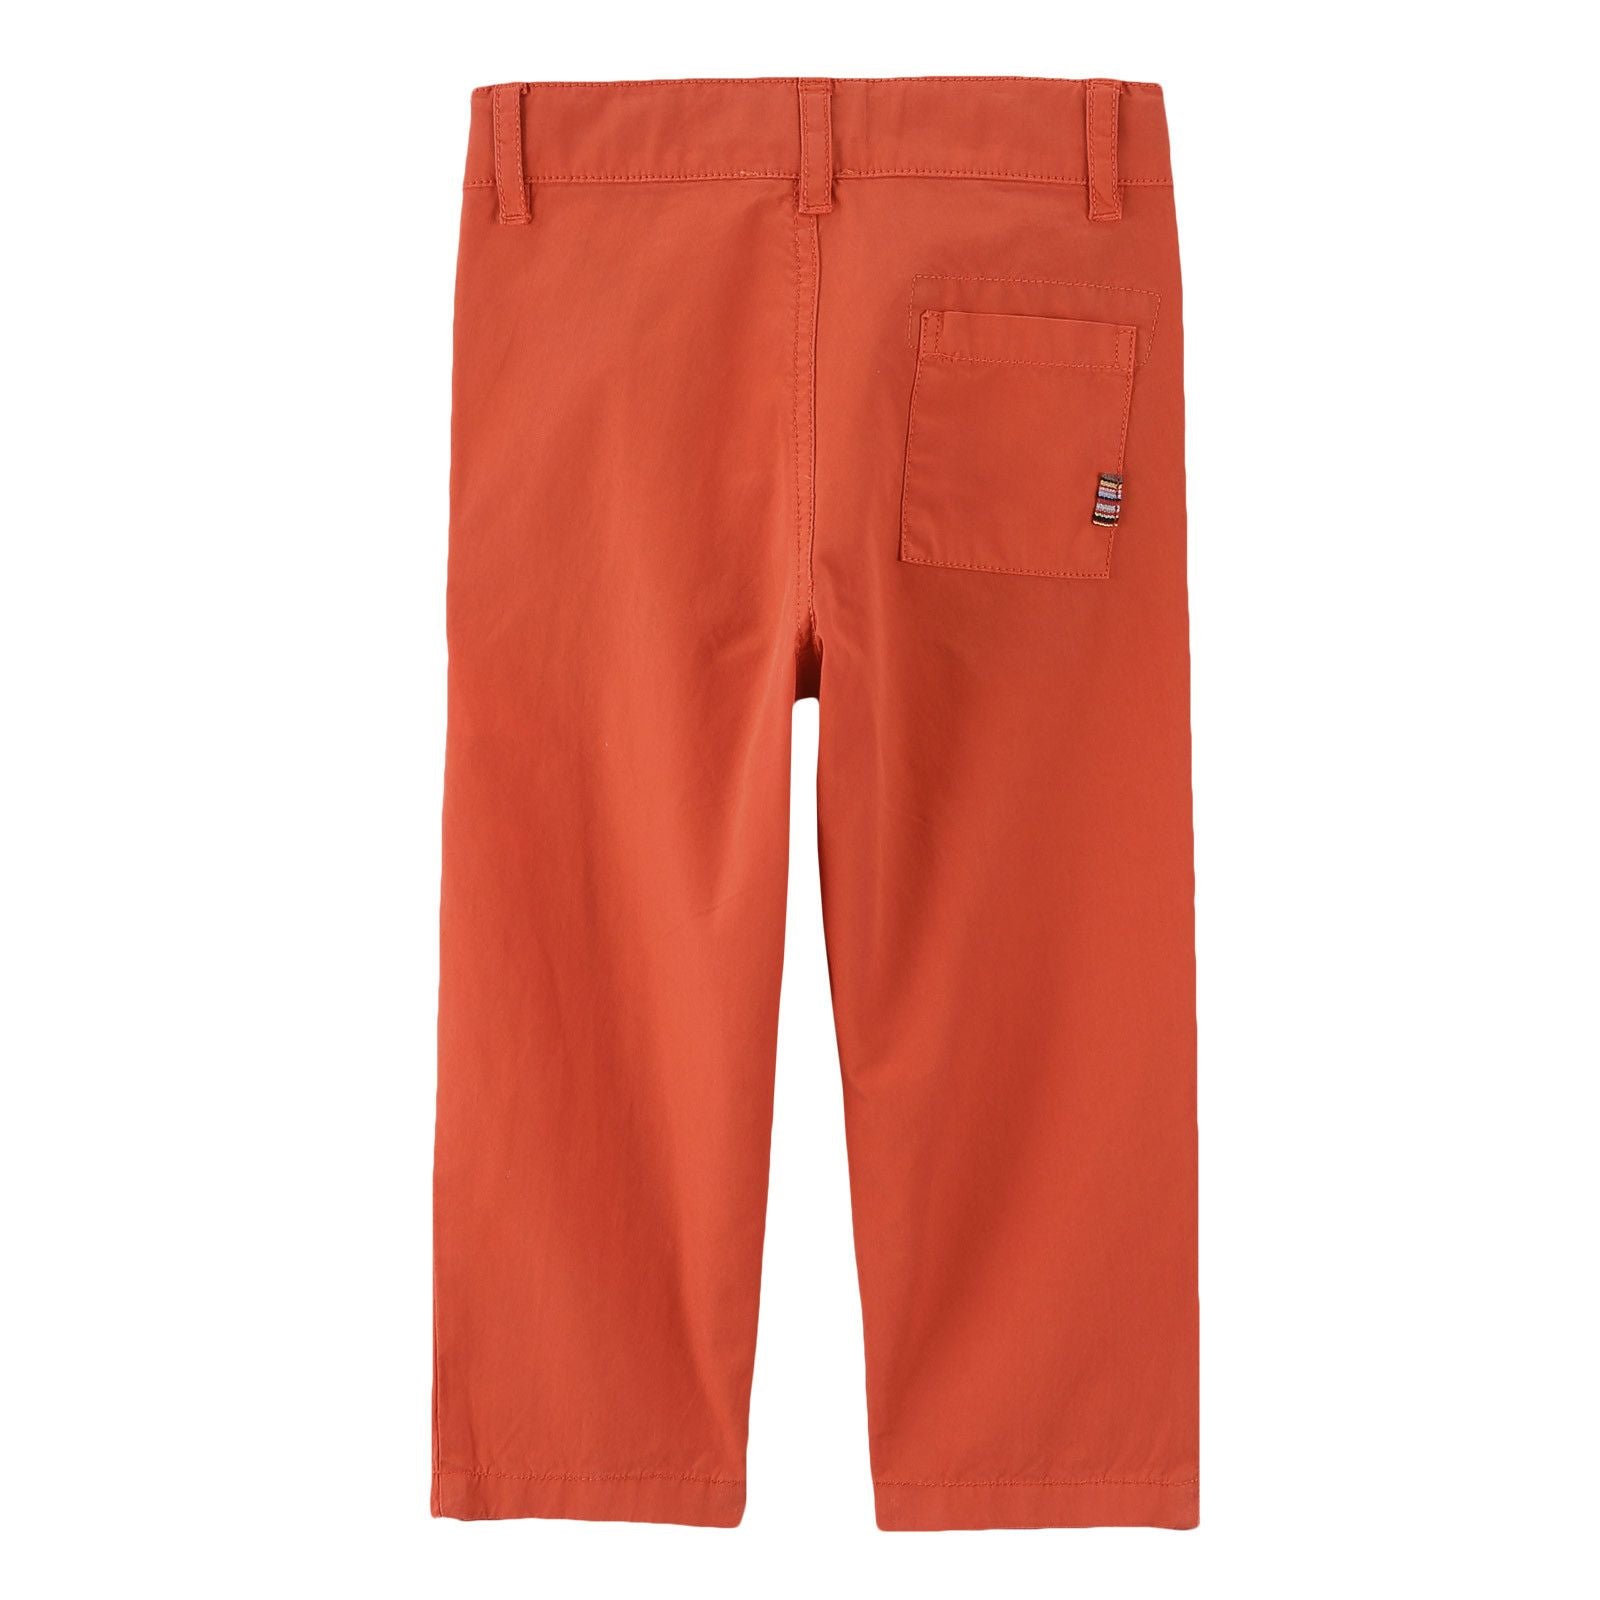 Boys Red Cotton Straight Cut Style Trousers - CÉMAROSE | Children's Fashion Store - 2